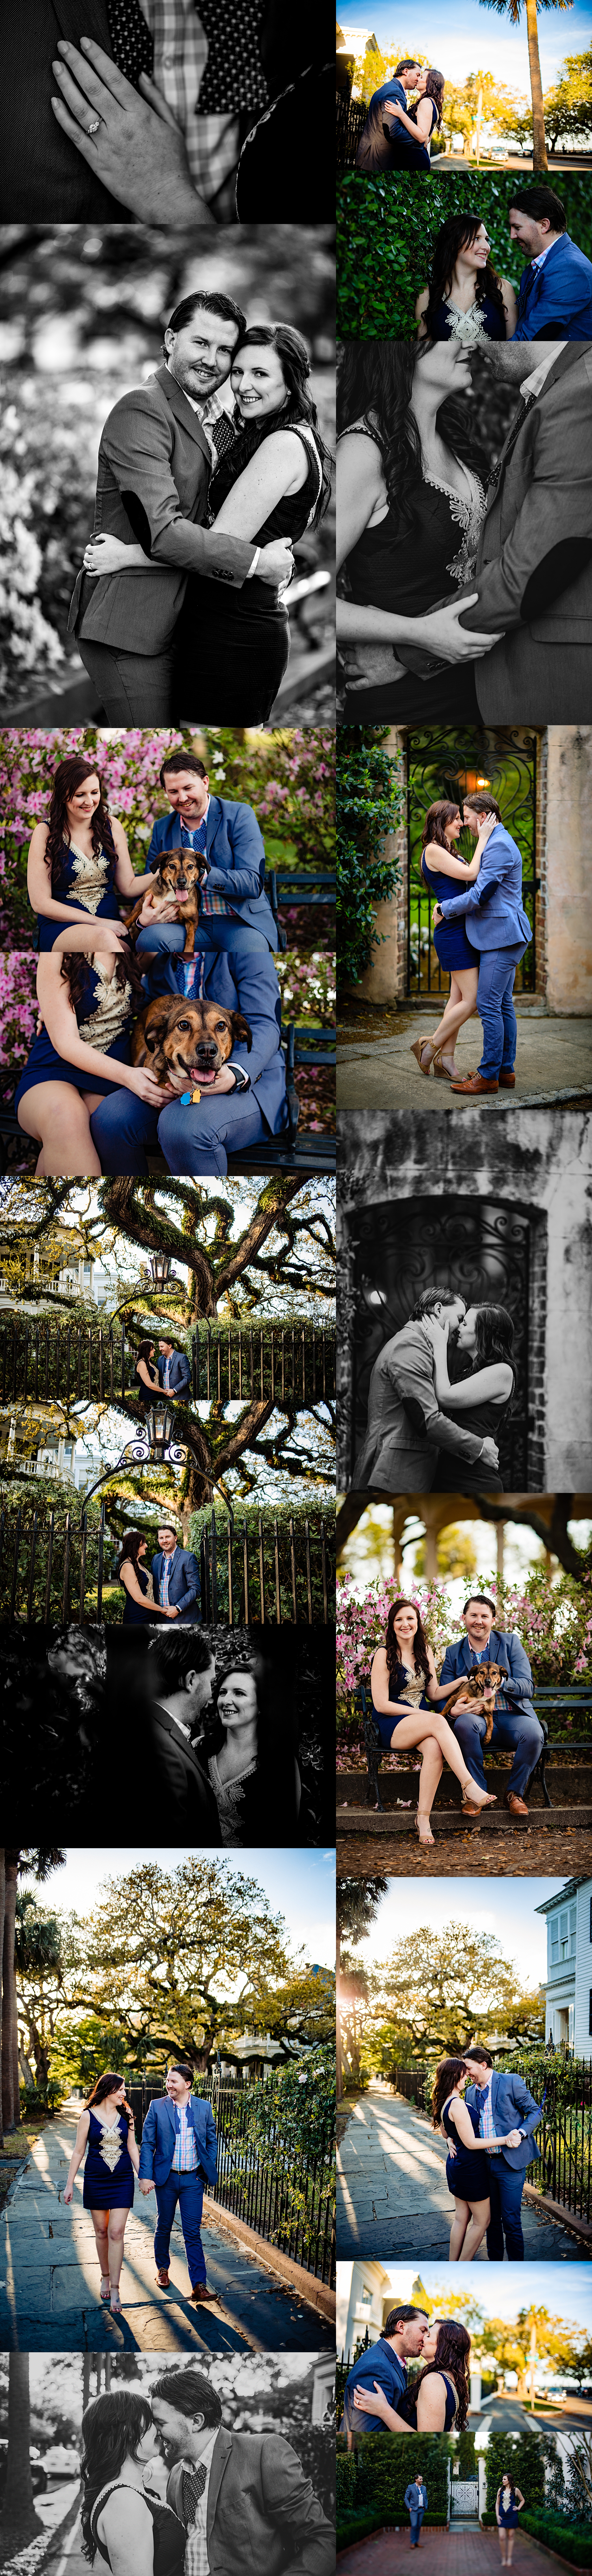 Downtown Charleston, Cory Lee Photography, Charleston Engagement, Engaged, Charleston, Charleston Wedding Photographer, clpcouple, clpwedding, Southern Wedding, Lilly, Dog, Engagement Session with Dog